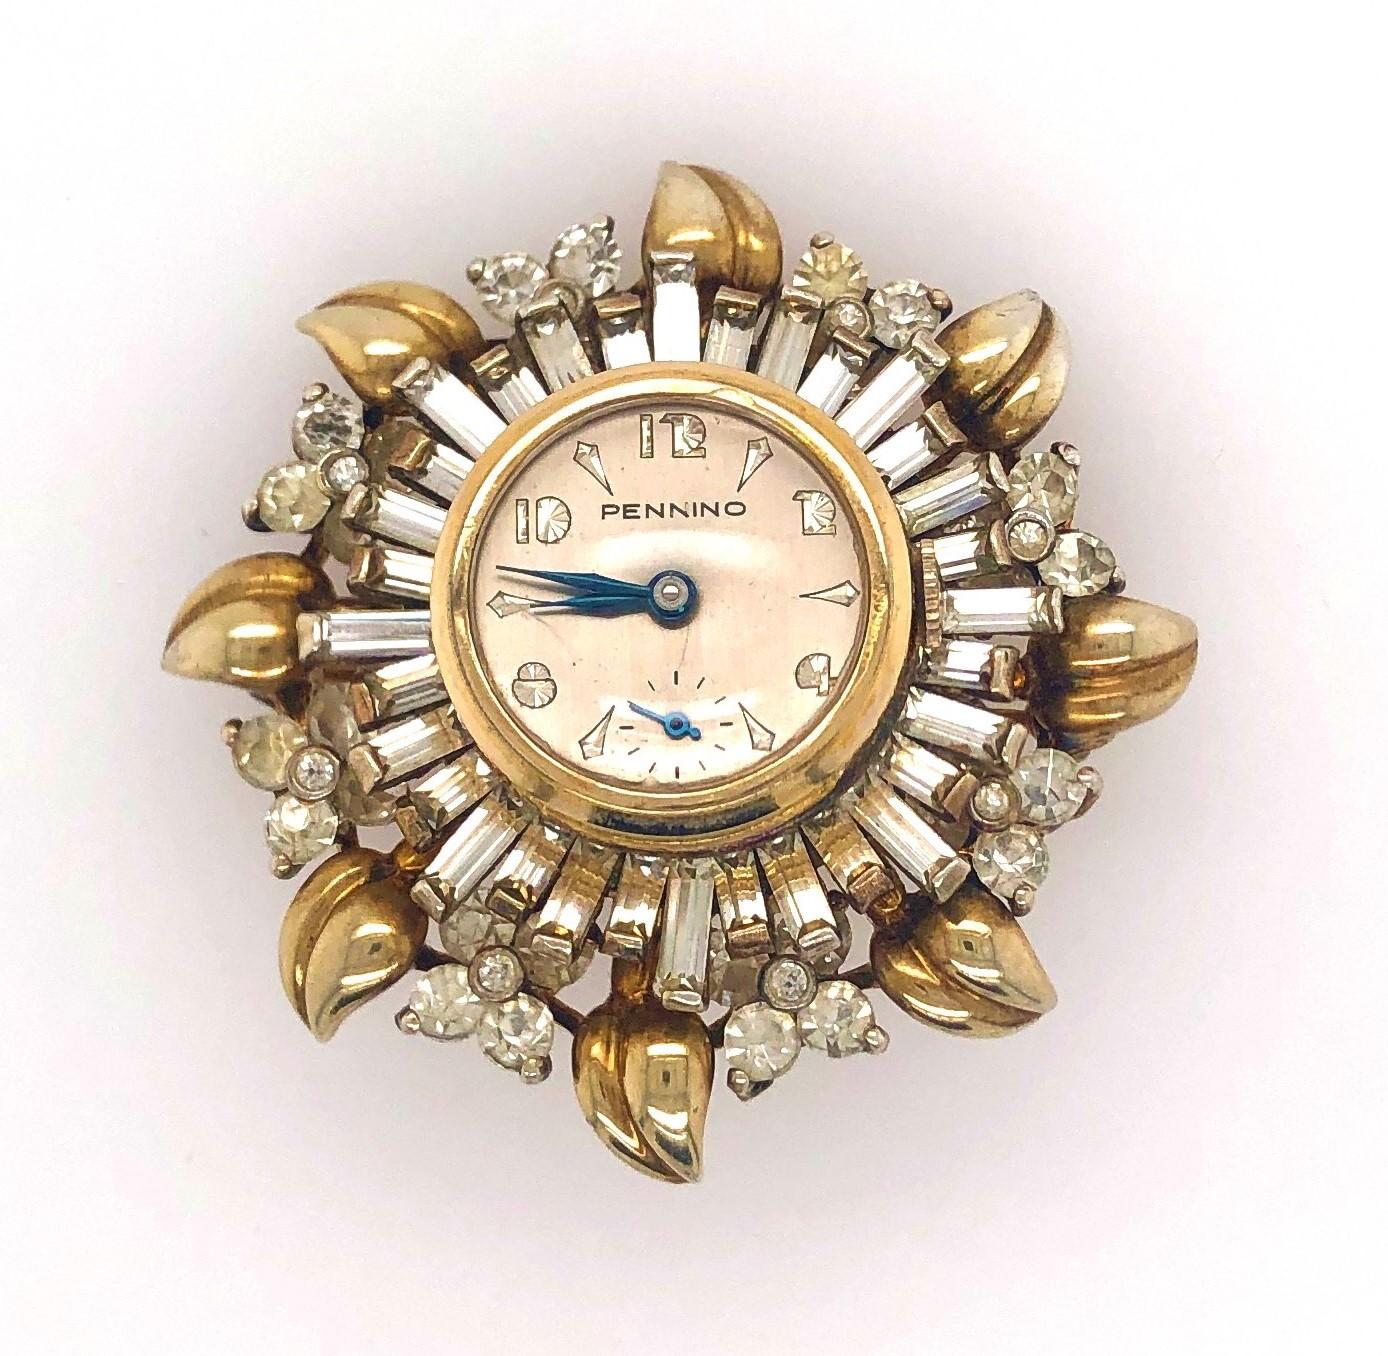 Pennino Sunburst Sterling Silver Vermeil Rhinestone Watch Brooch Pin Pendant In Good Condition For Sale In Mount Kisco, NY